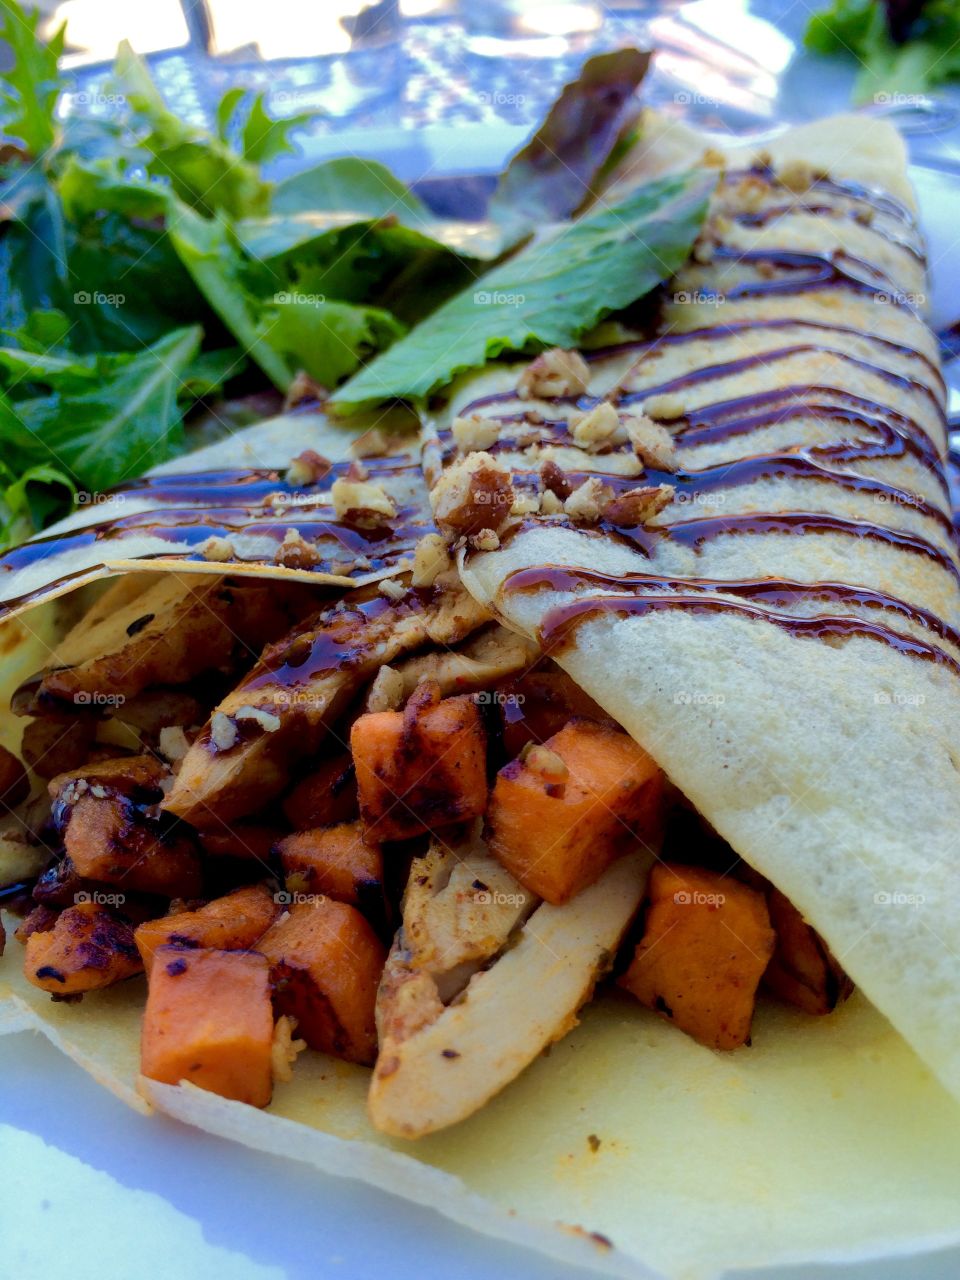 Lunch crepe